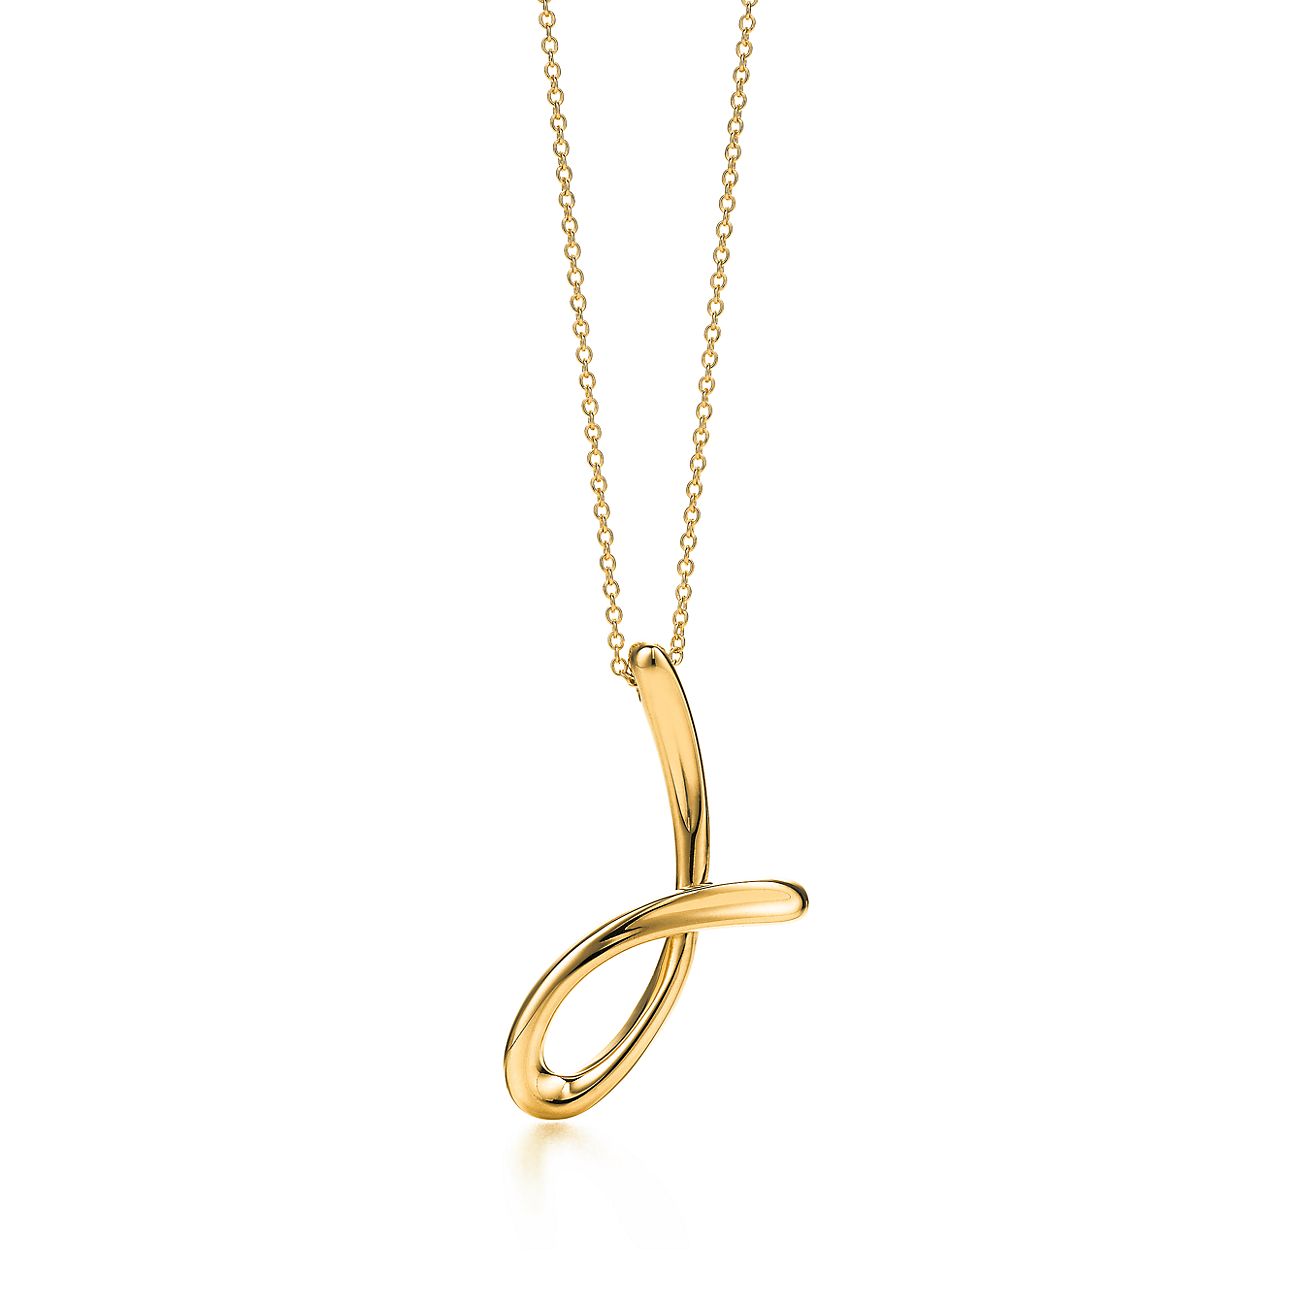 Women's Initial Jewellery - Unique Personalised Gifts